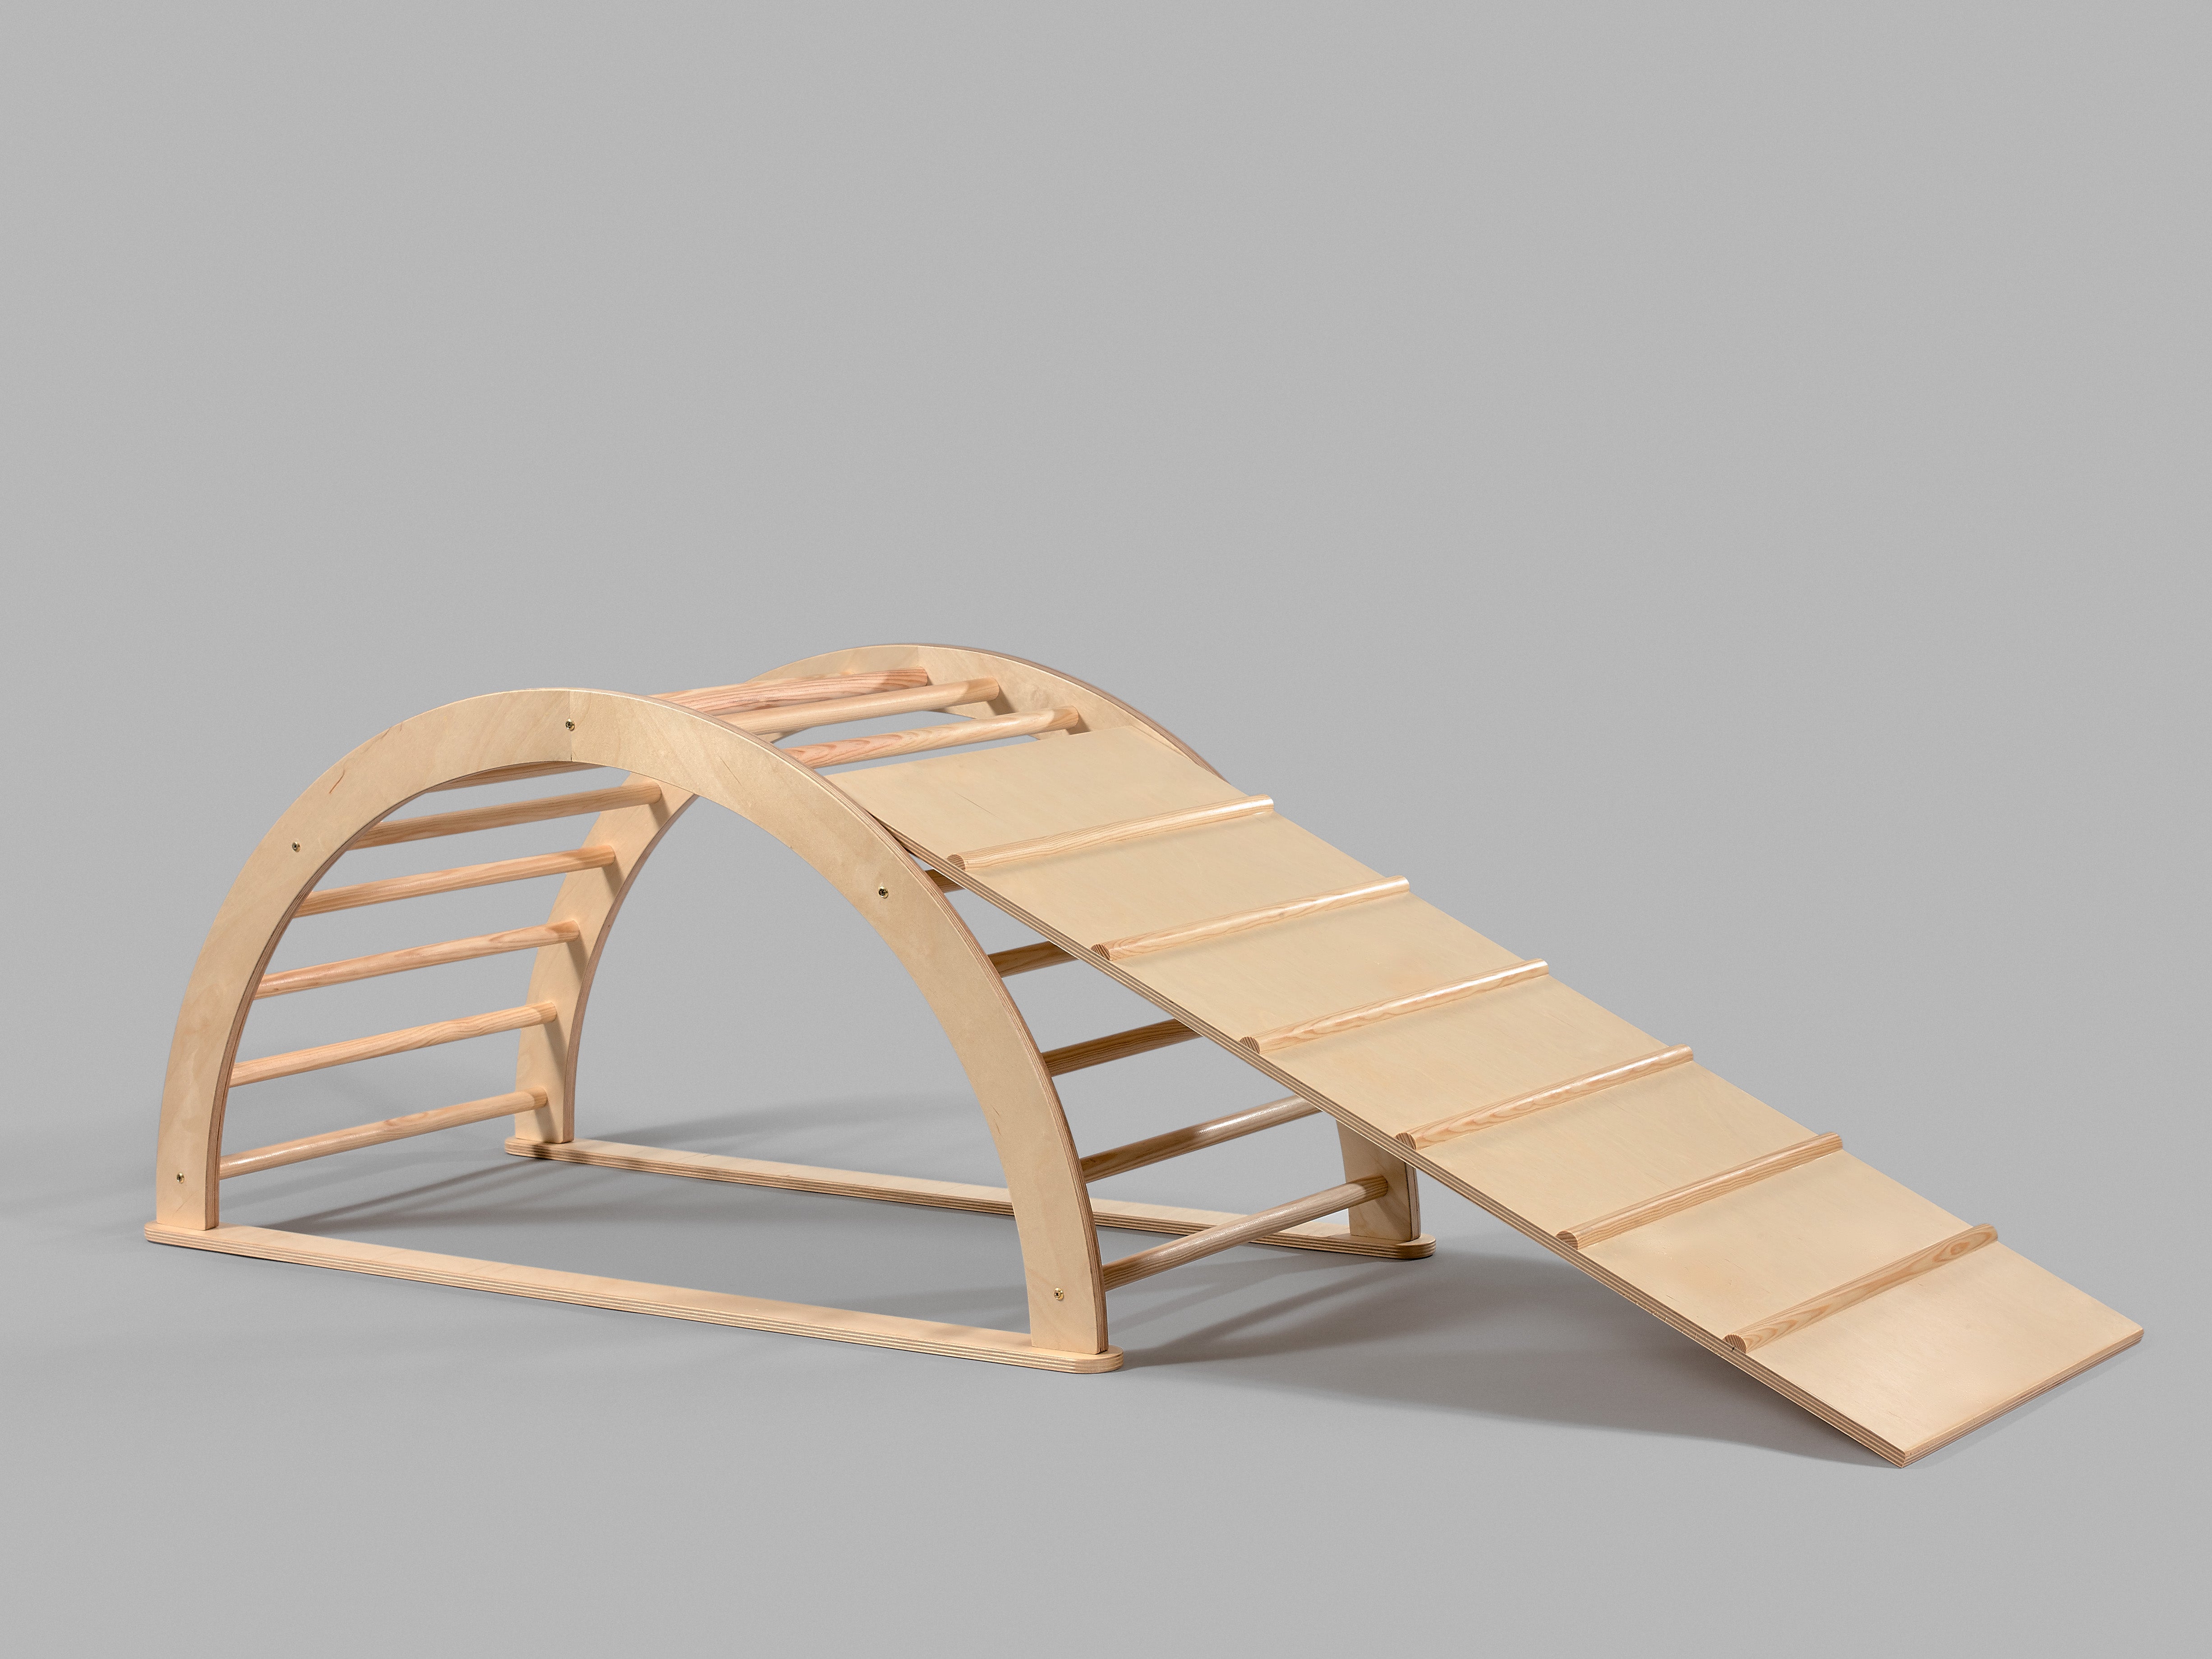 Spring ramp for Triangle or Arch (Pikler)